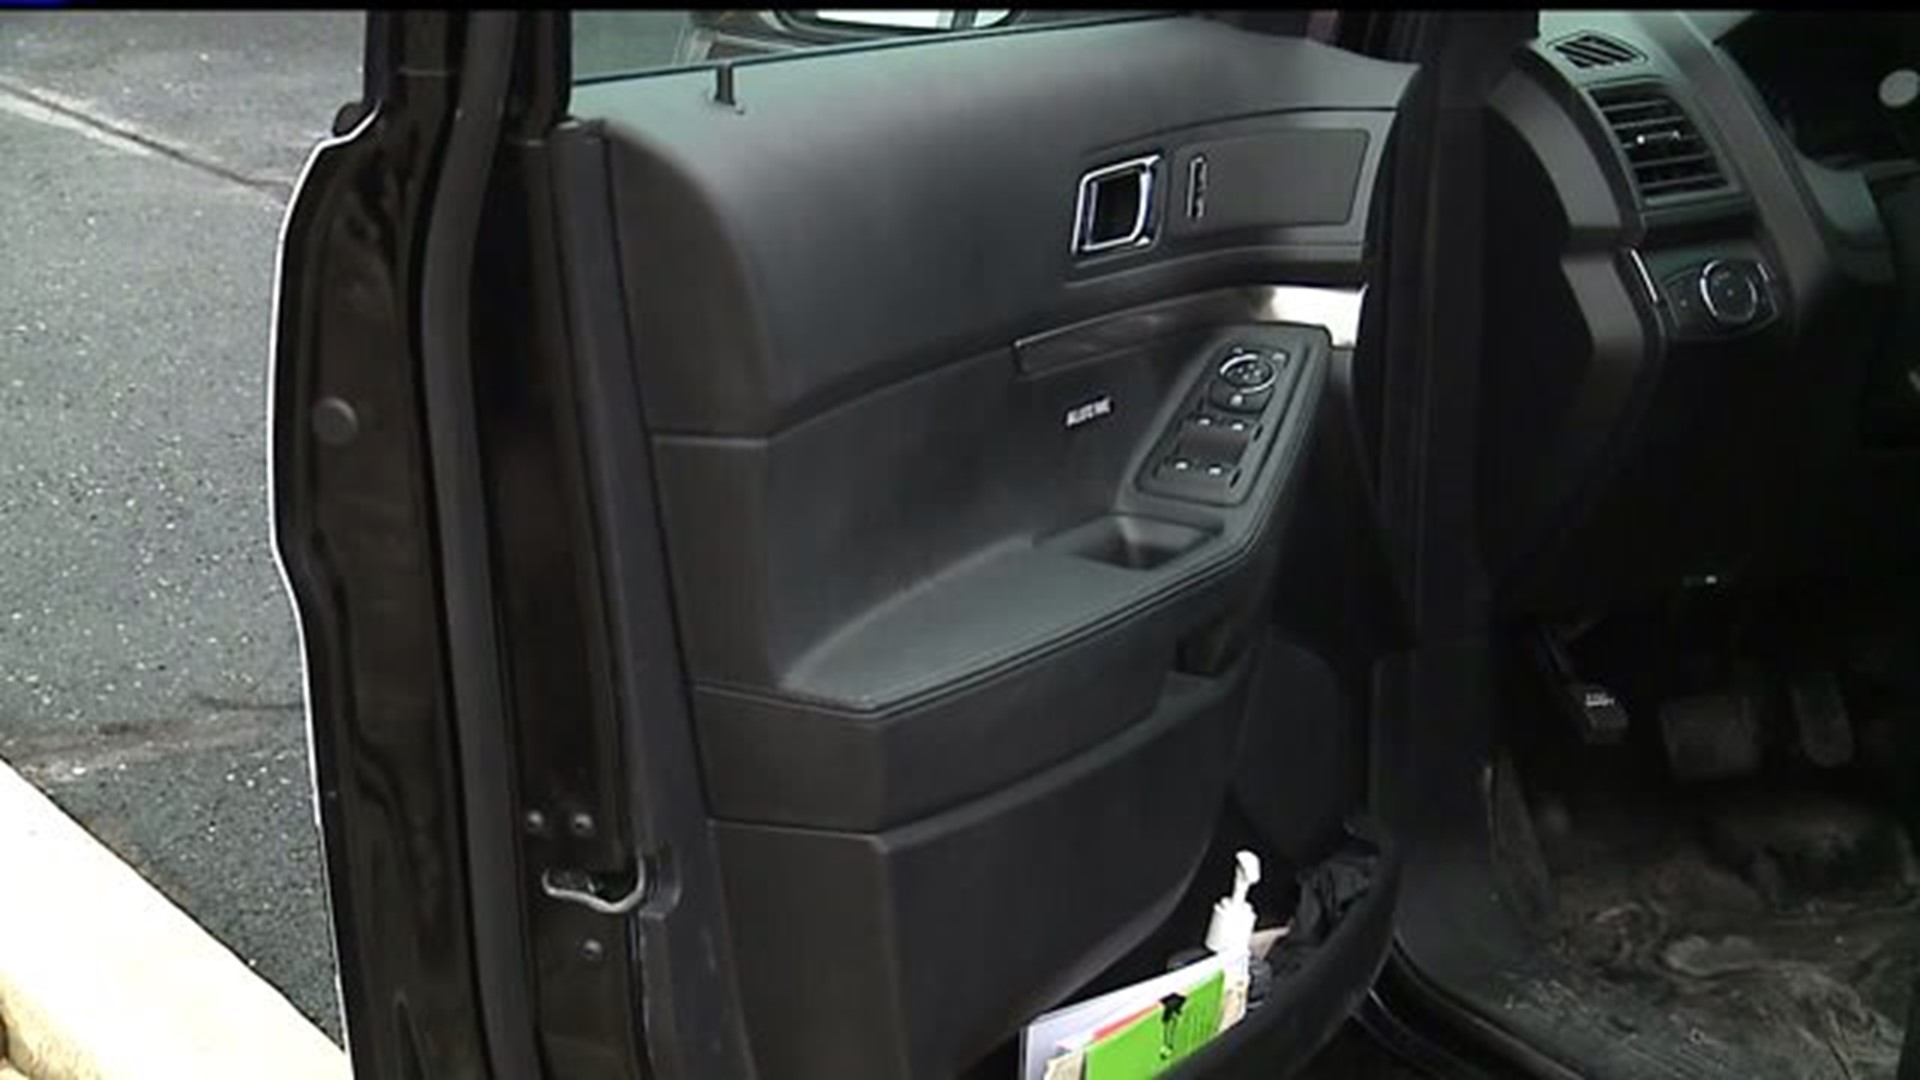 Police departments in Cumberland Co. get cruisers with bullet-resistant doors